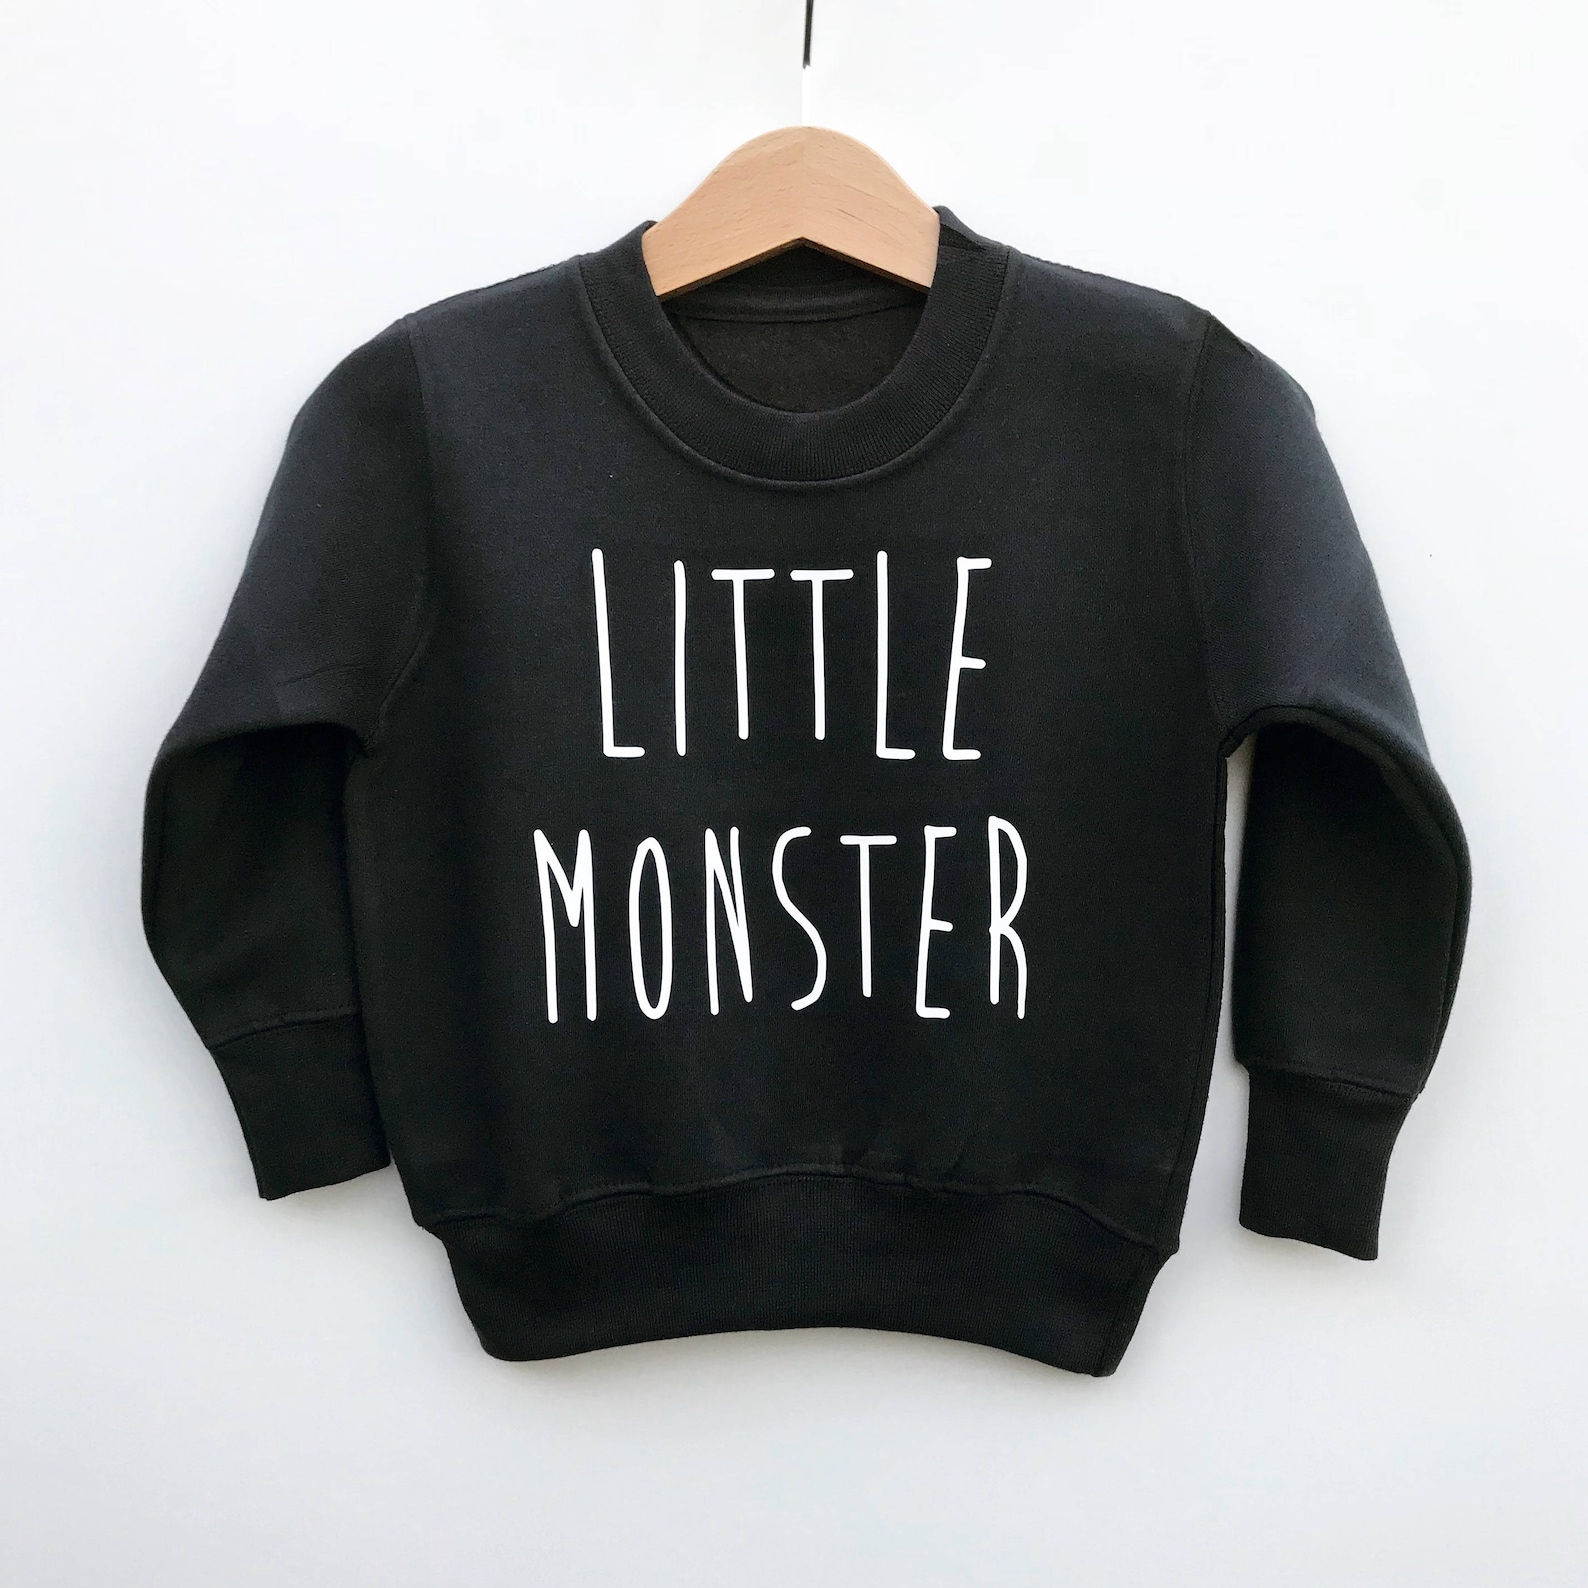 Better up Baby Monster одежда. Baby Monster Butter up фото одежды. Like that baby monster текст